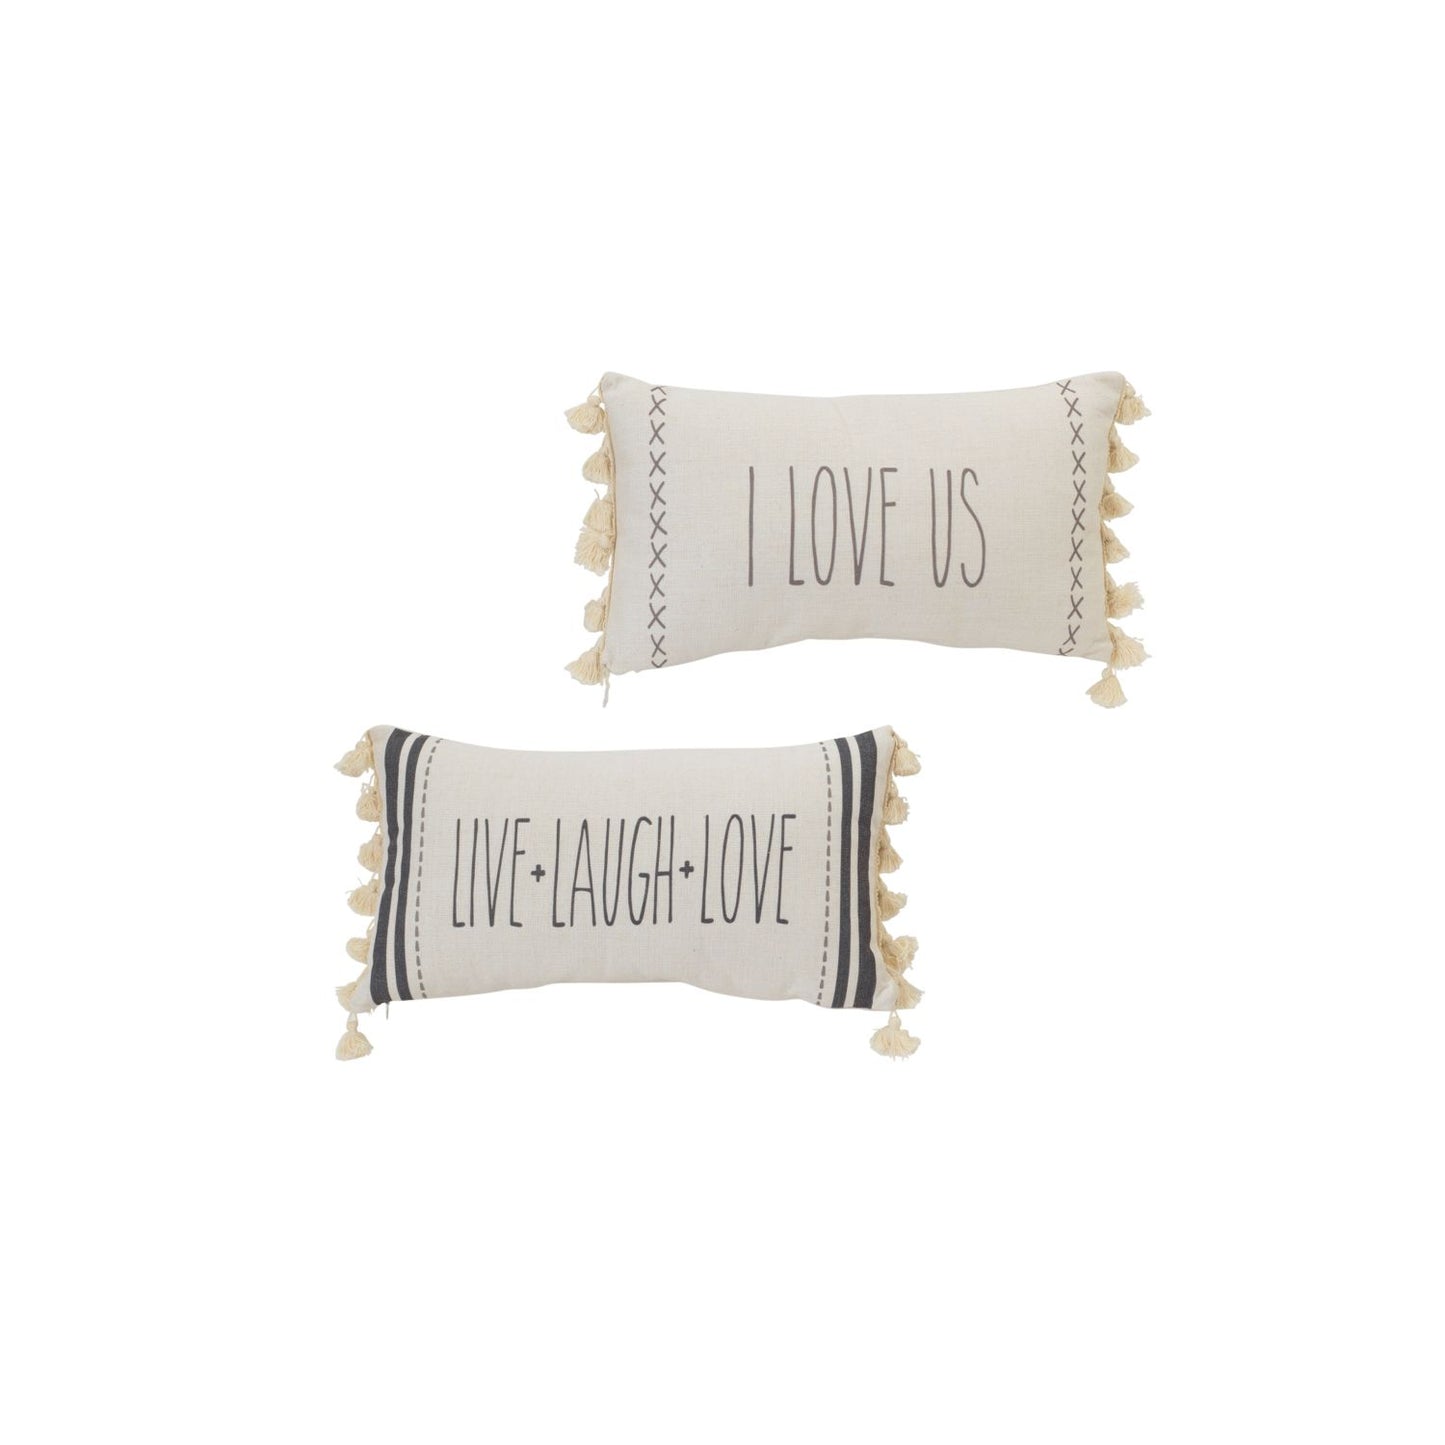 Gerson Company 20.8"L Fabric "I Love Us" & "Live Laugh Love" Pillow, 2 Assorted